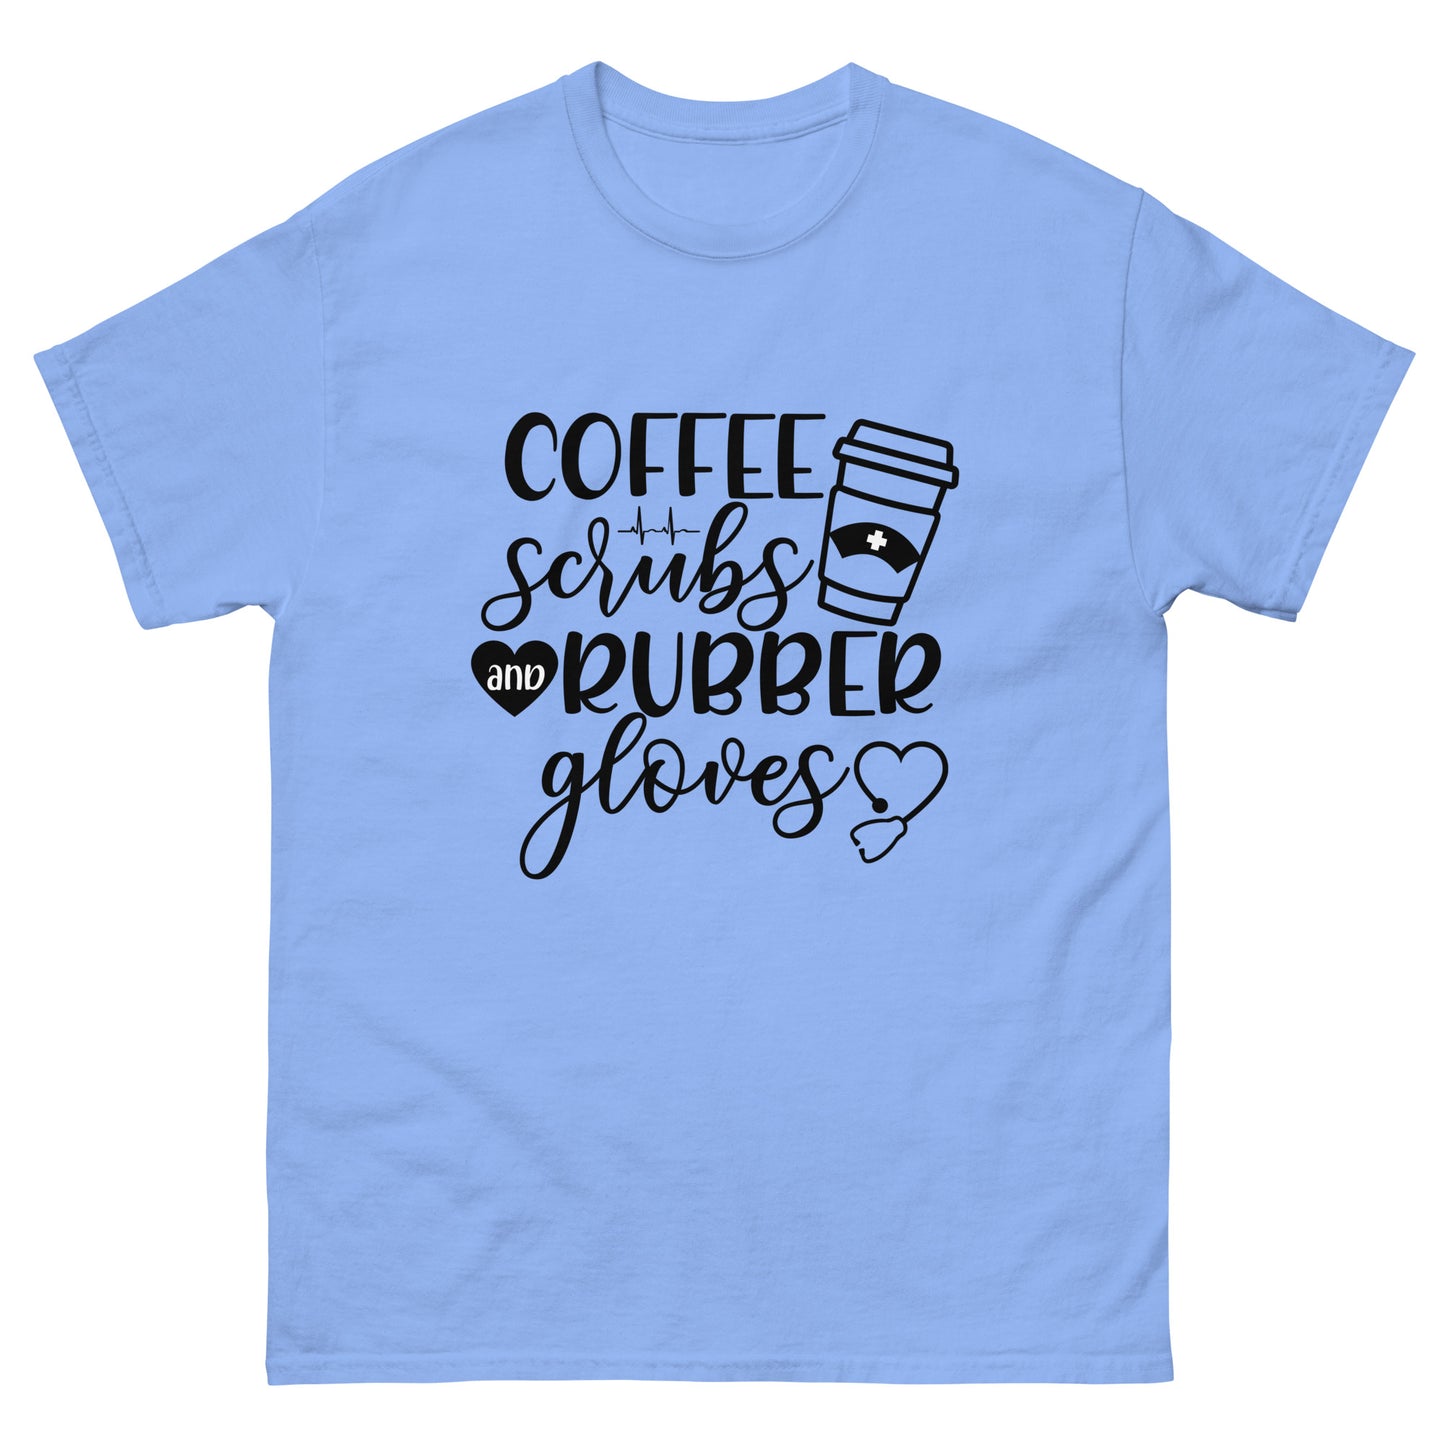 Coffee, Scrubs and Rubber gloves - nursing - classic tee